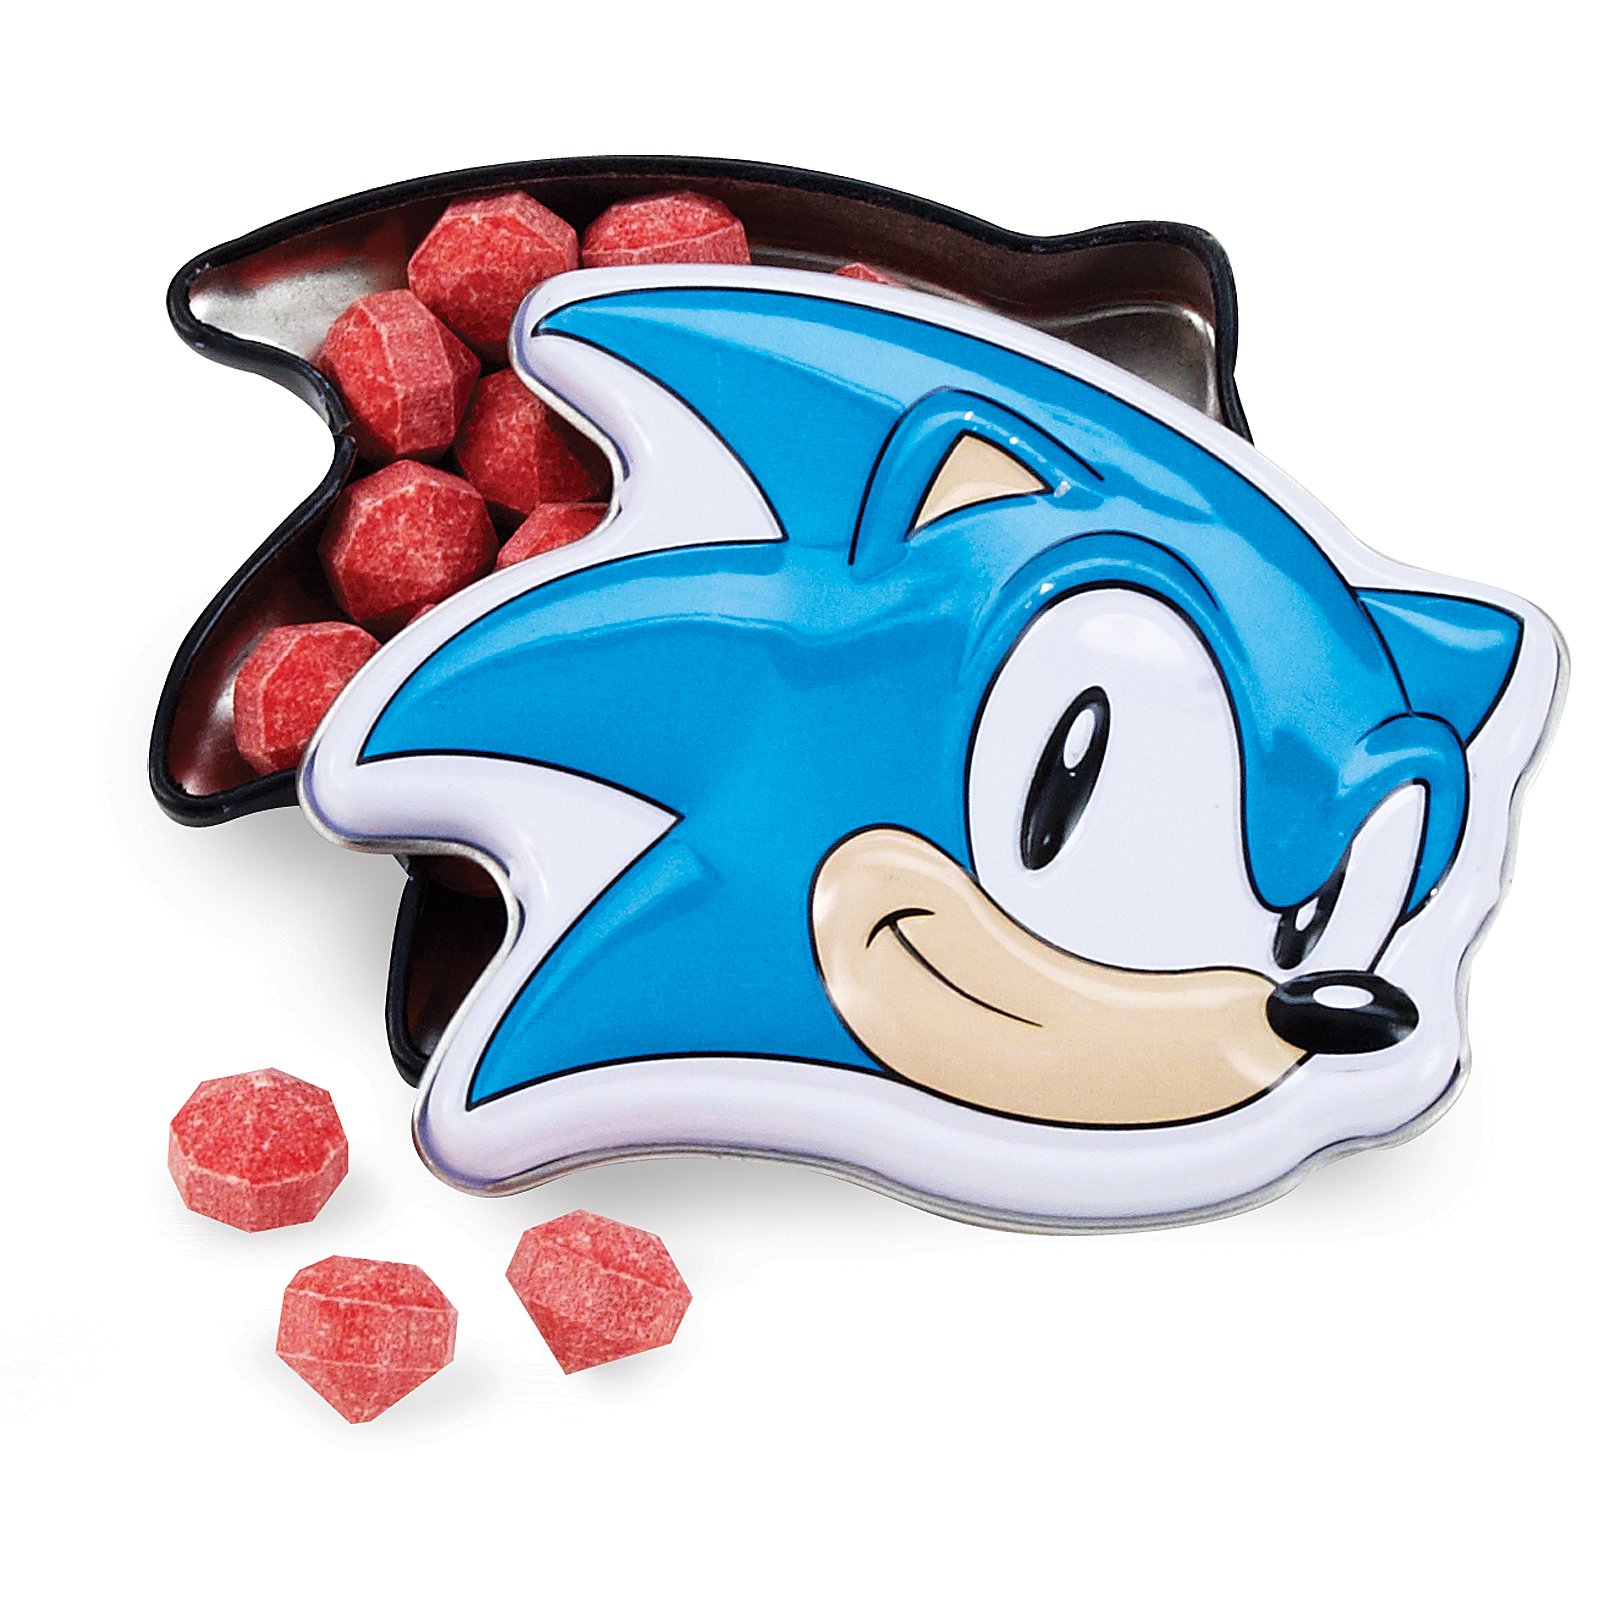 Sonic the Hedgehog Chaos Emerald Sours (1 tin)